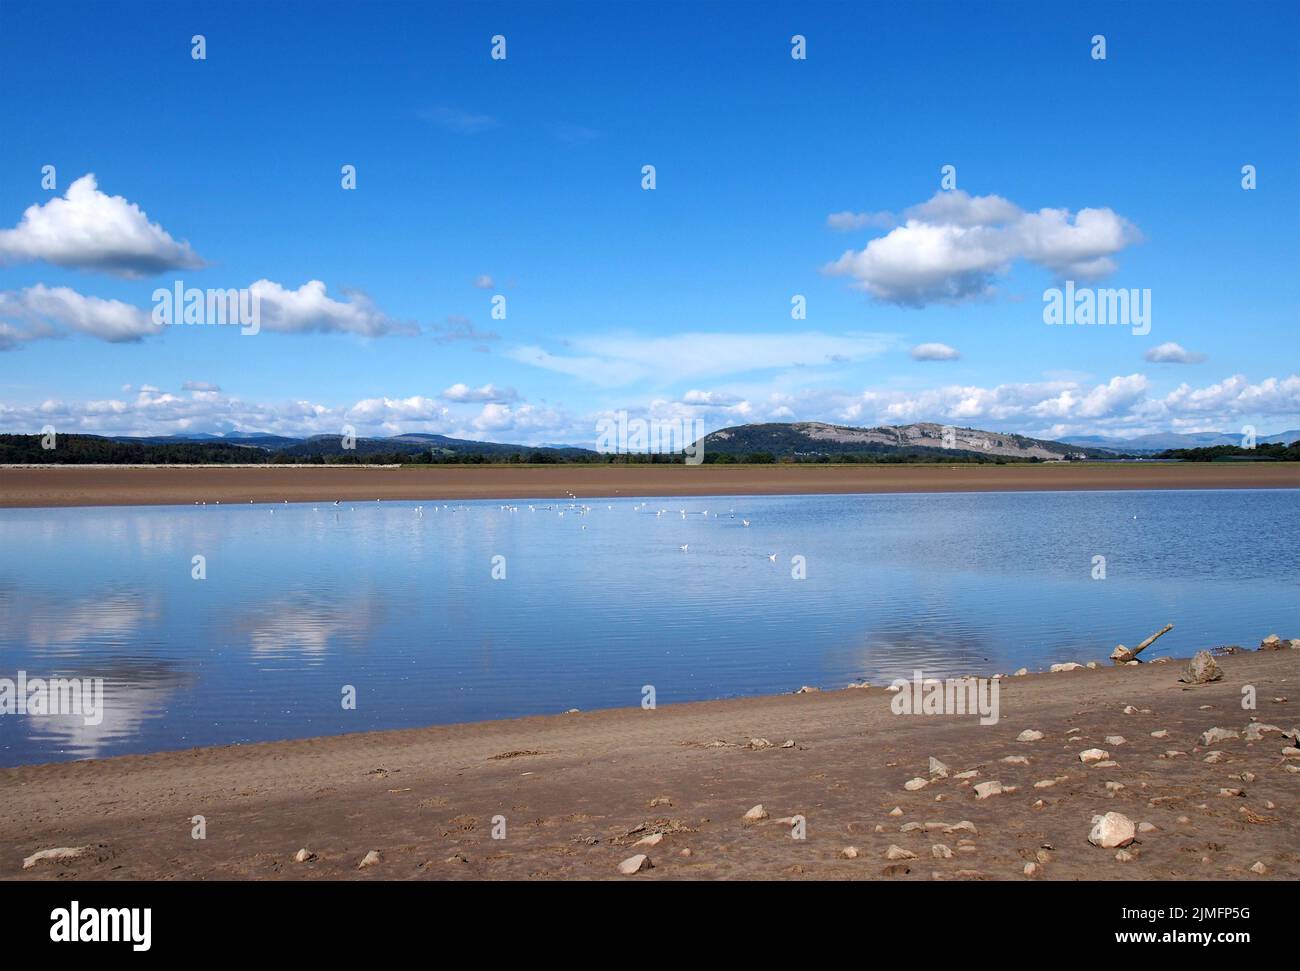 The river kent in cumbria with with lake district hills in the distance and clouds reflected in the water Stock Photo